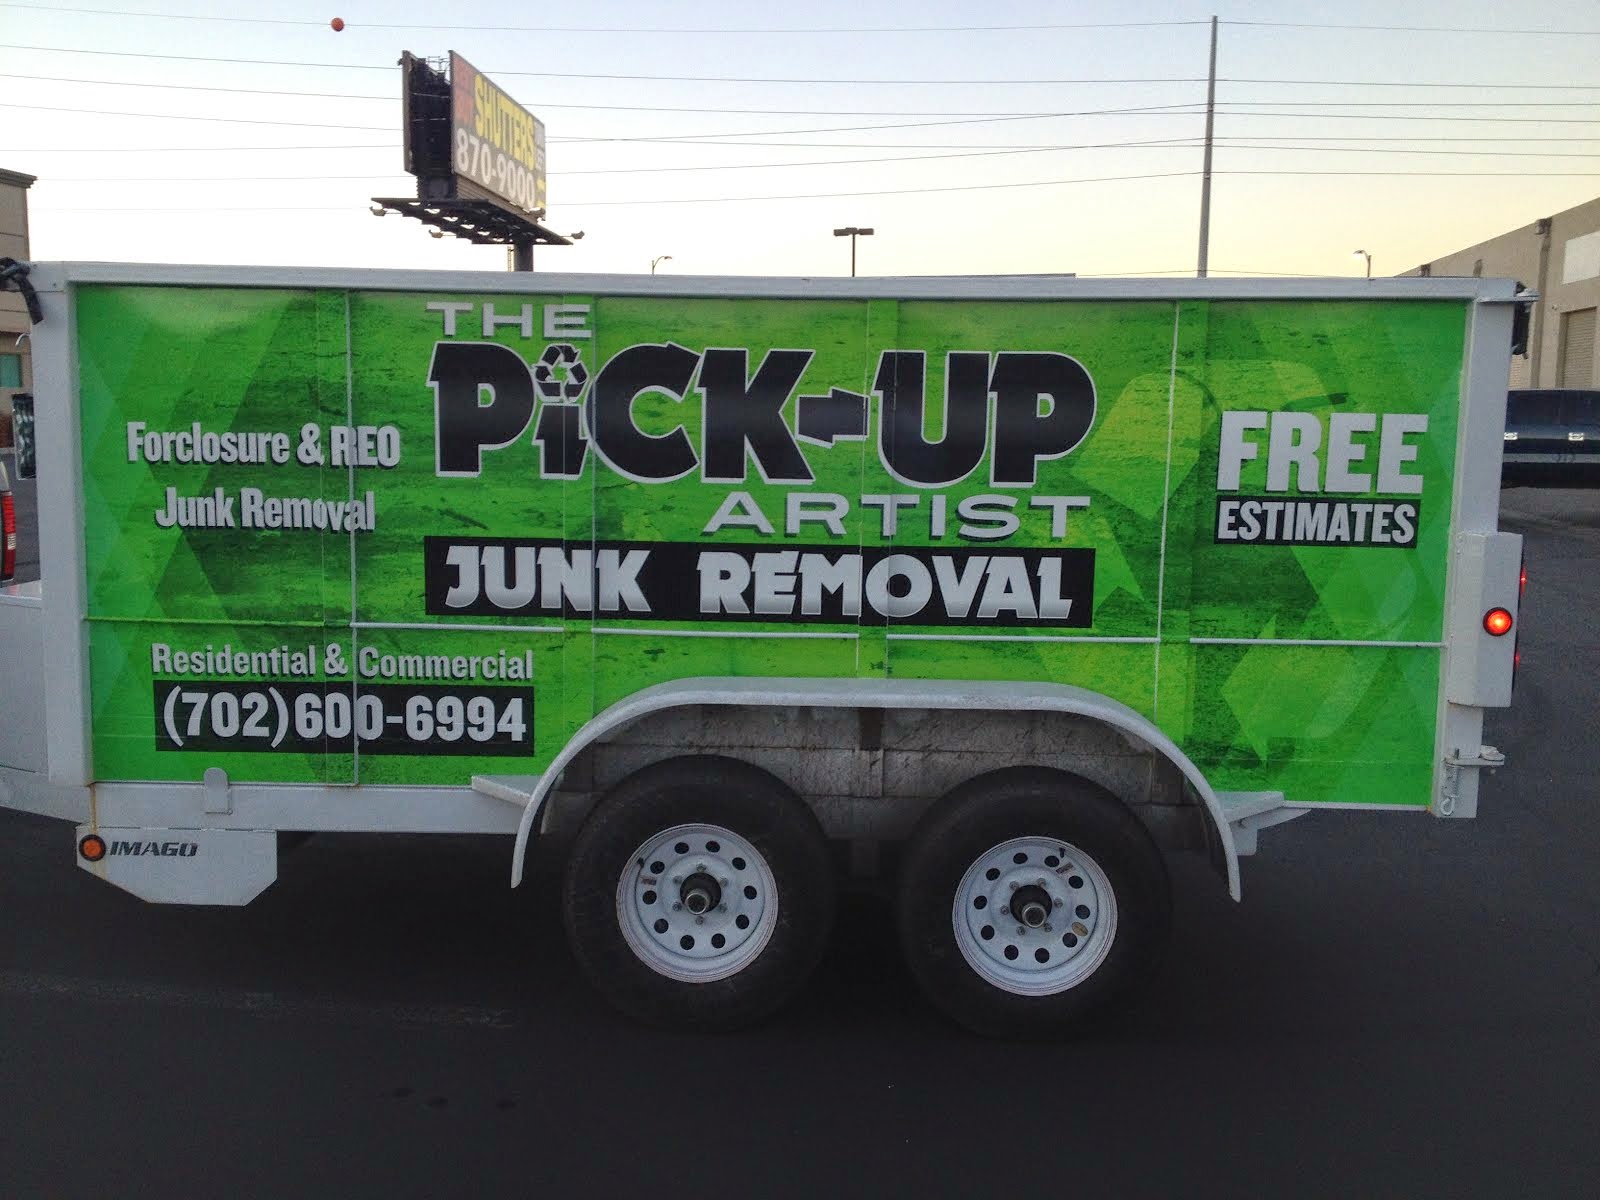 The Pick Up Artist Junk Removal 702-600-6994